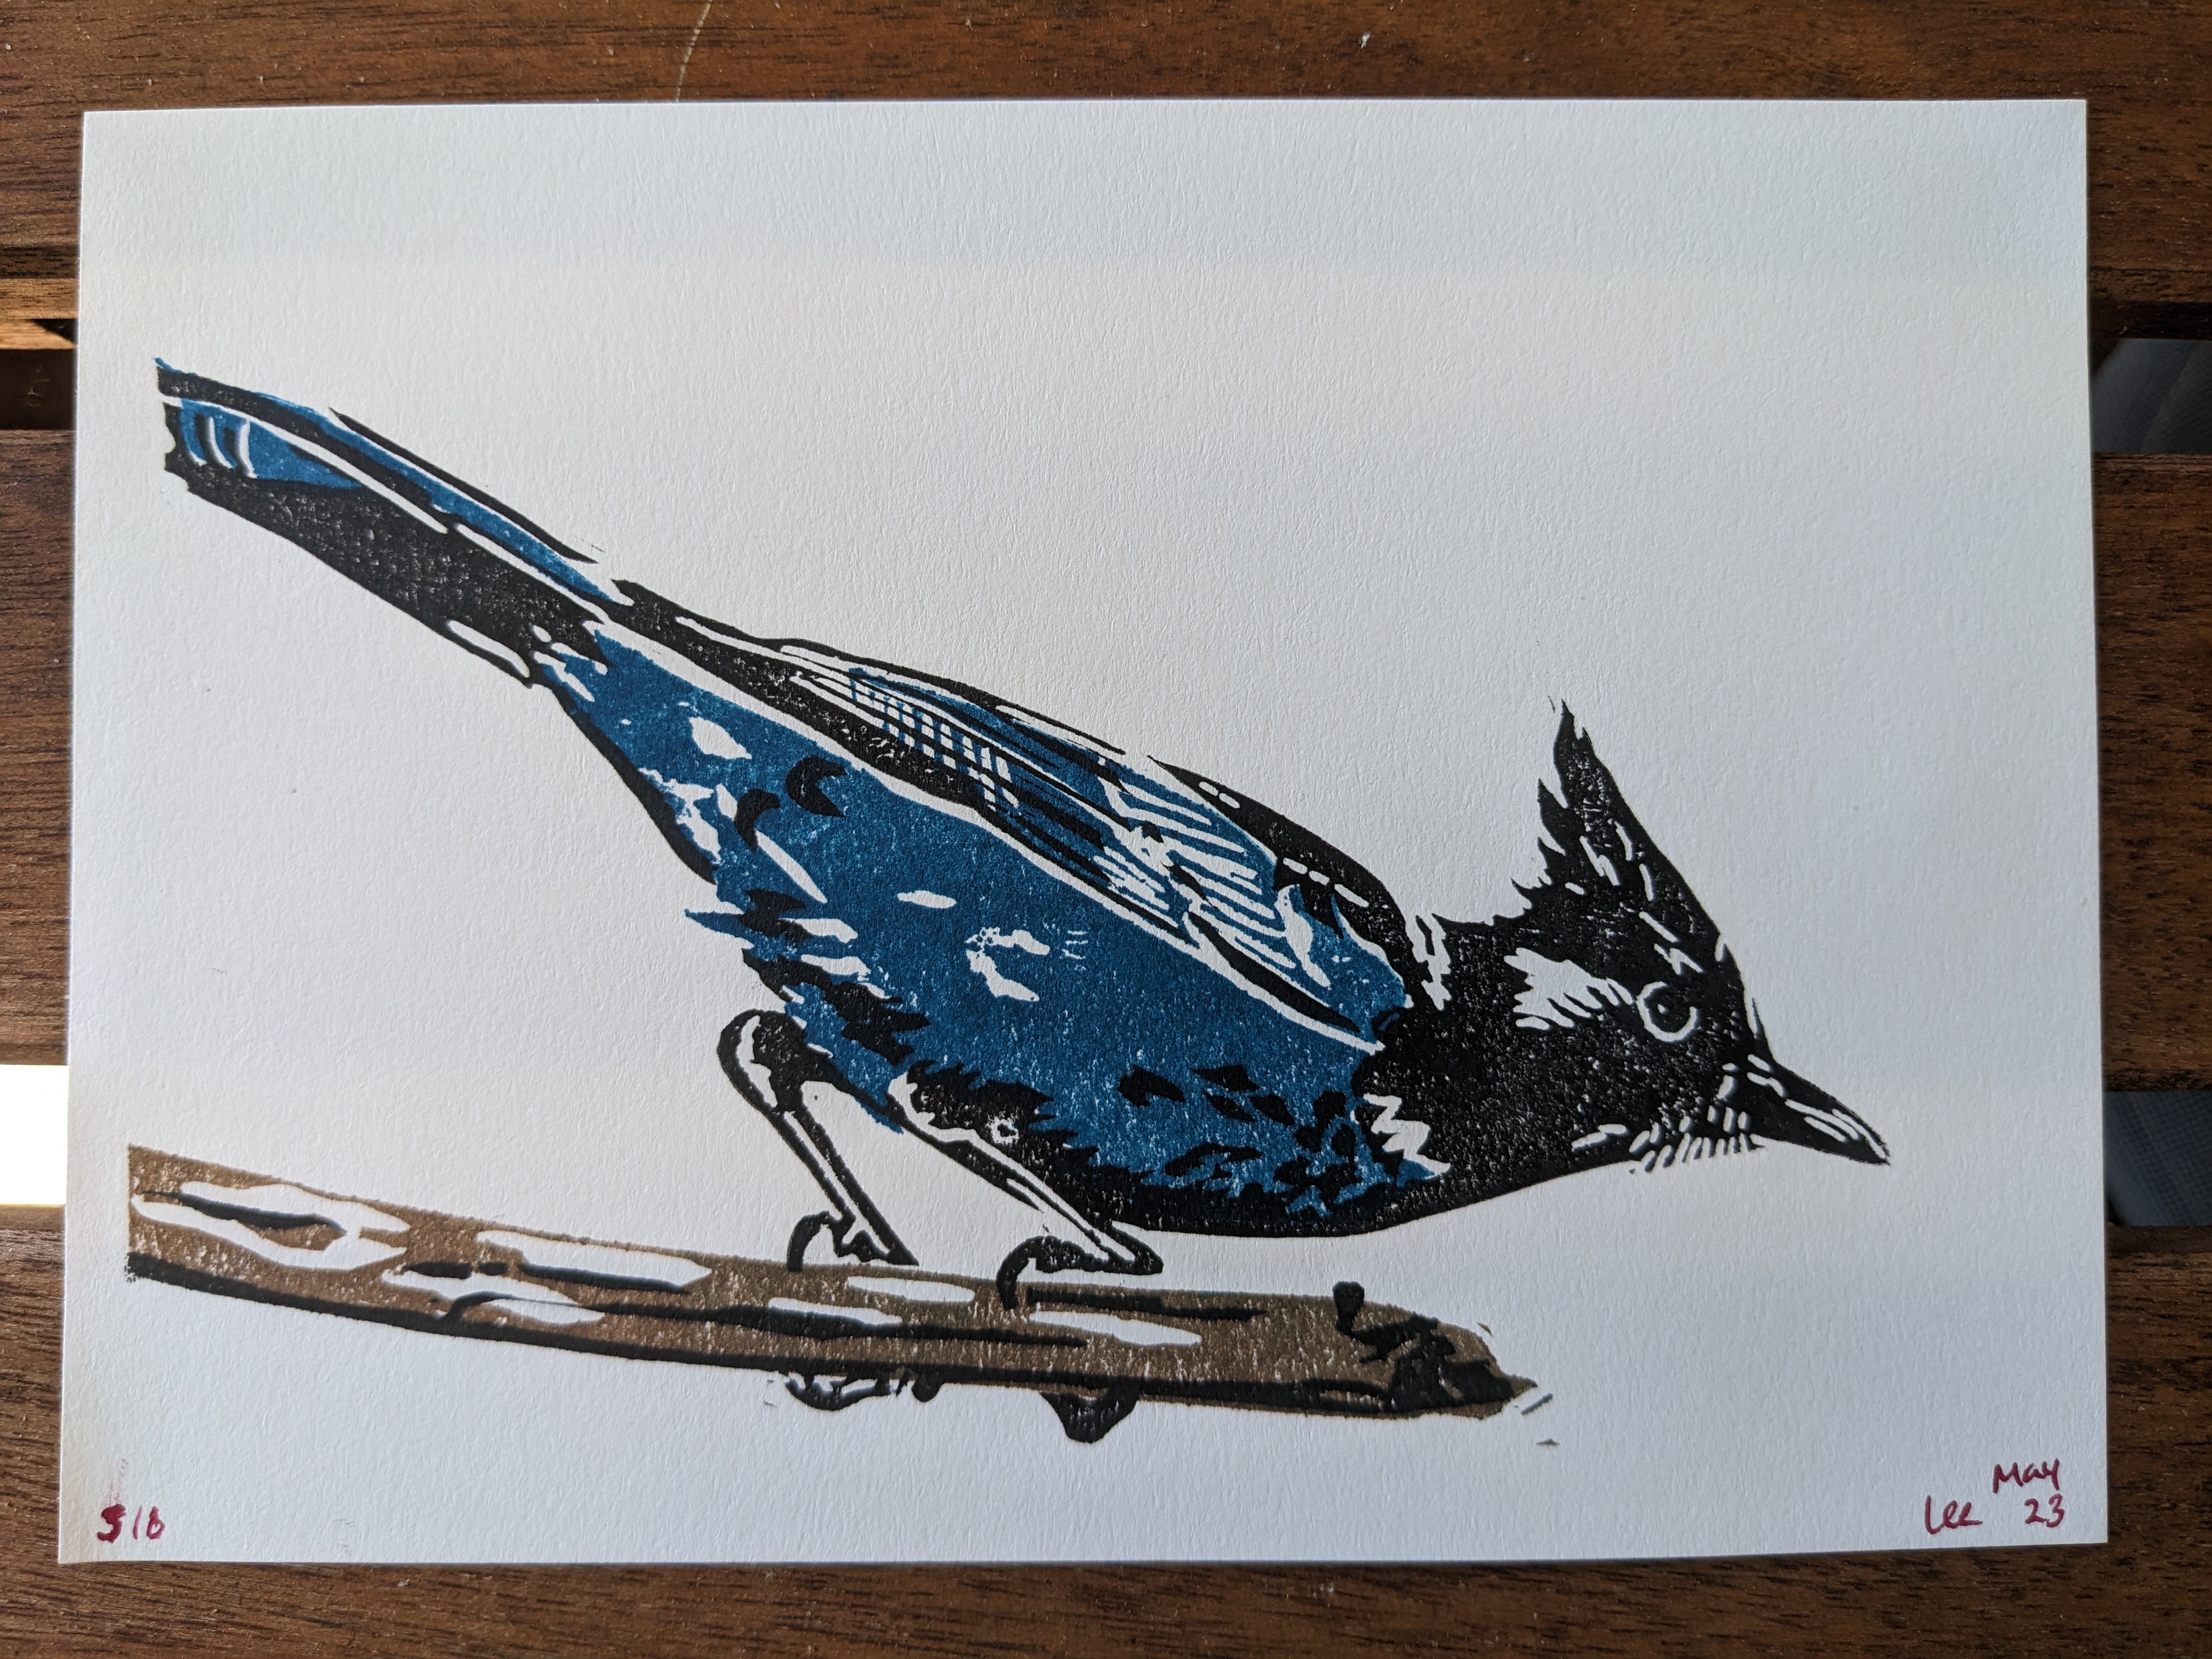 A print of a stellar's jay, a beautiful black and blue bird, about to take off from a branch